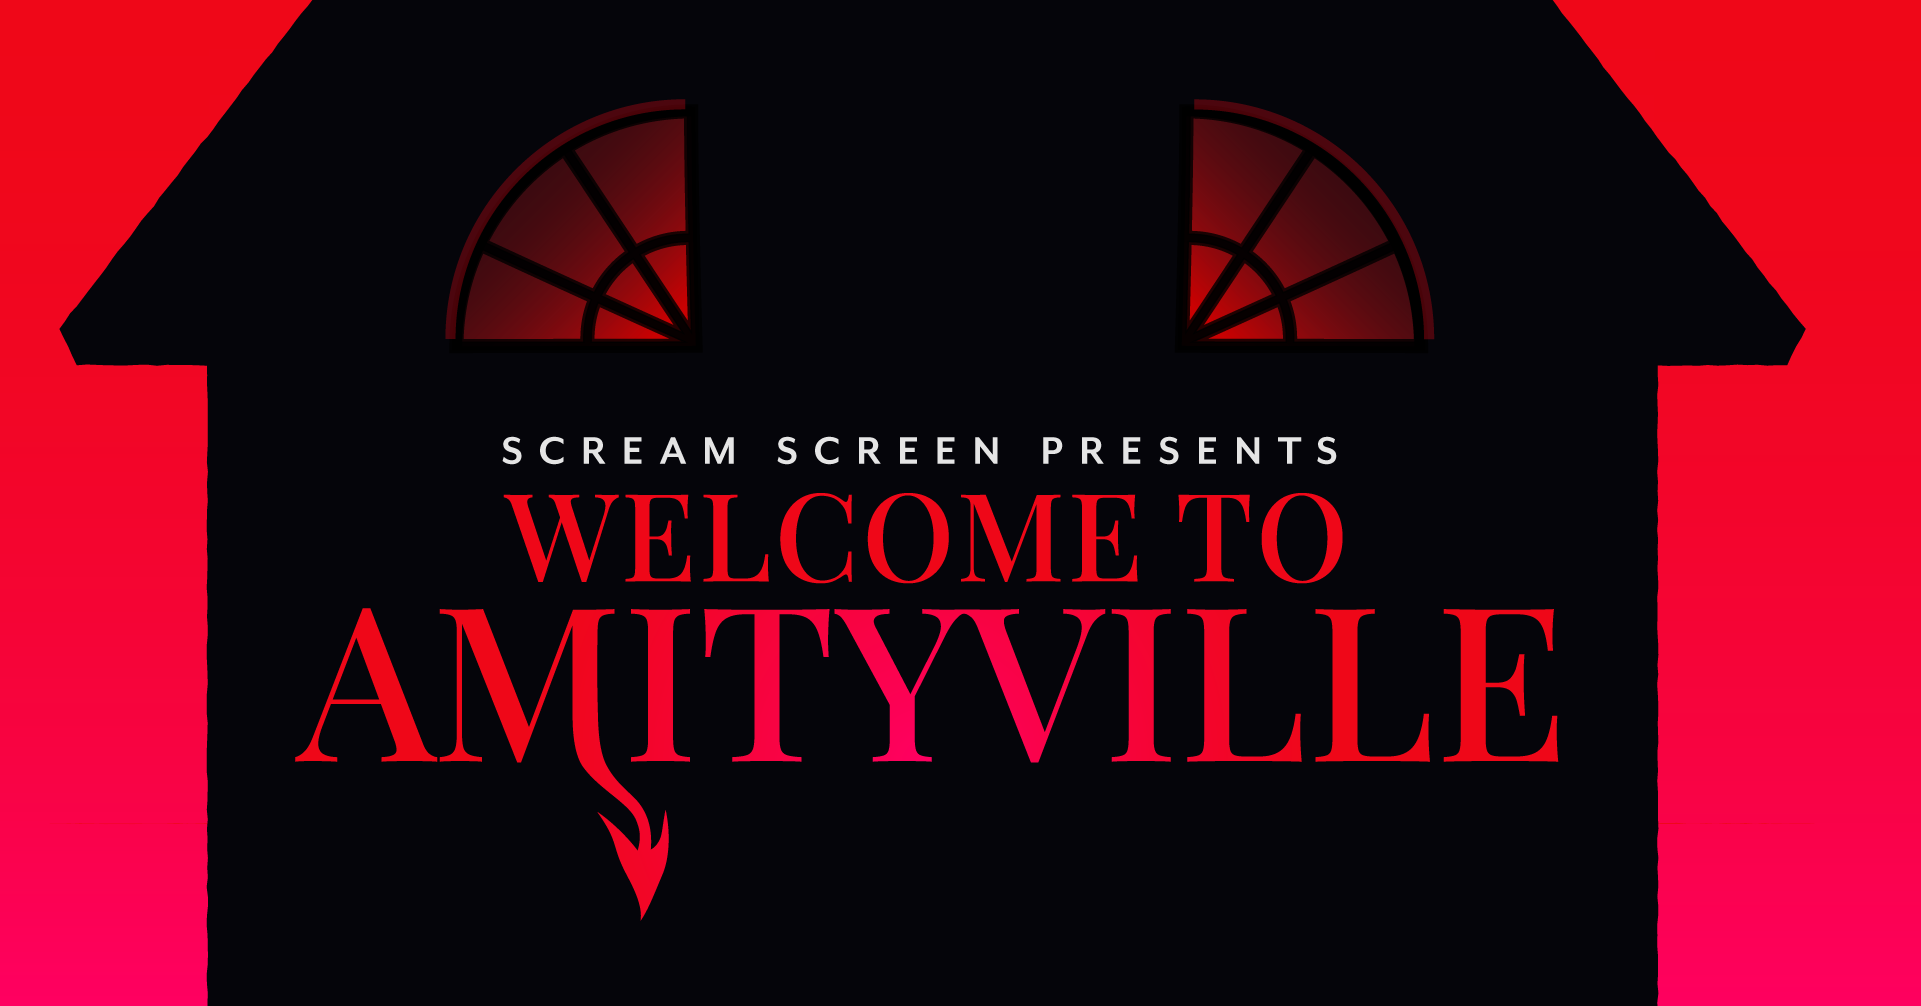 Scream Screen presents: WELCOME TO AMITYVILLE!